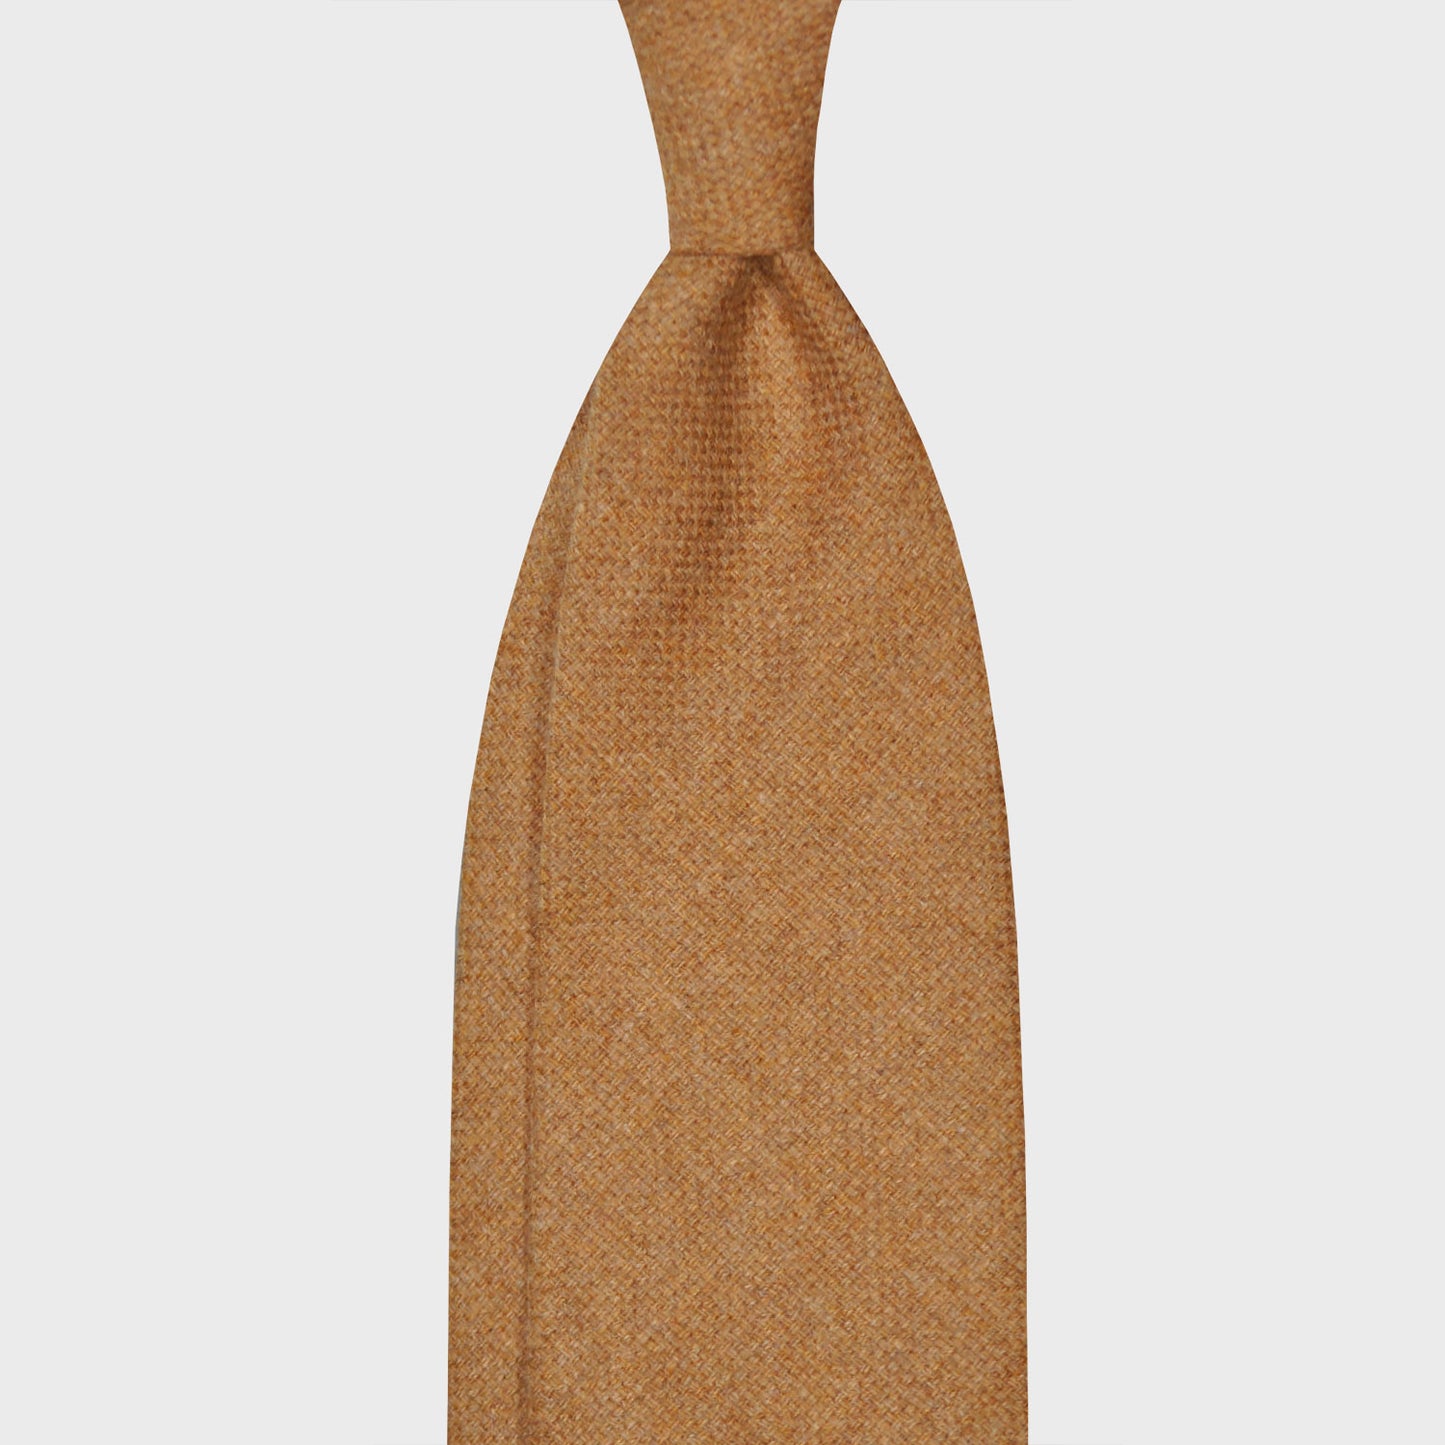 Load image into Gallery viewer, Camel Brown Light Flannel Twill Wool Tie Unlined 3 Folds. Soft and light flannel twill wool tie, handmade F.Marino Napoli for Wools Boutique Uomo, camel brown color, soft fabric to the touch, not bristly, ideal for a regular knot.
